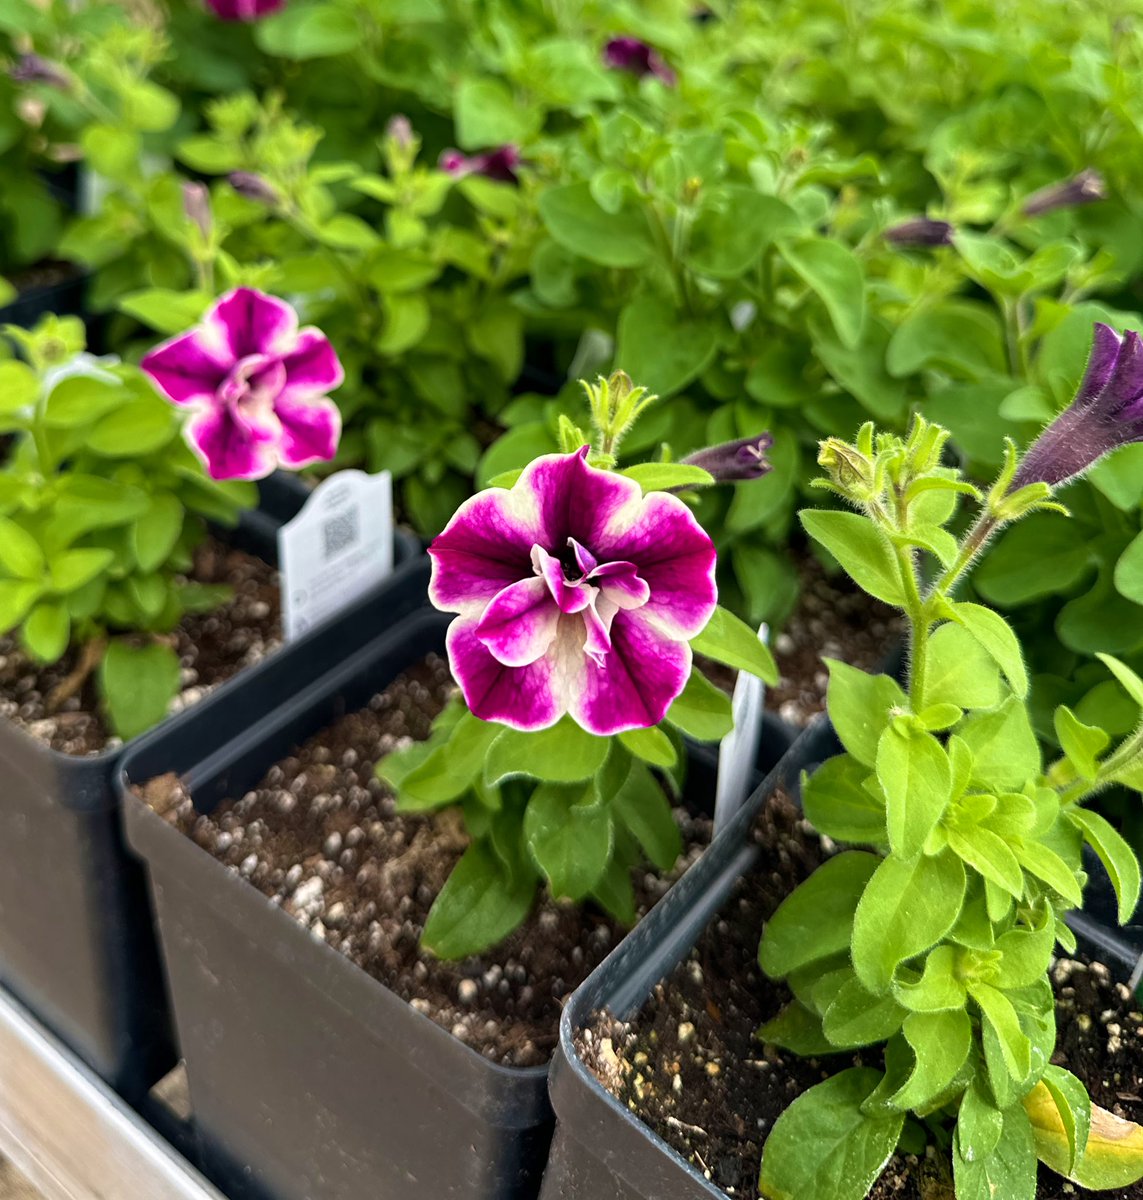 Another week, another sneak peek! Over the weekends, we have quite the number of petunias, roses, and more that had some early blooms yet again. After a cycle of pinching, they are ready to continue growth for our Plant Sale!